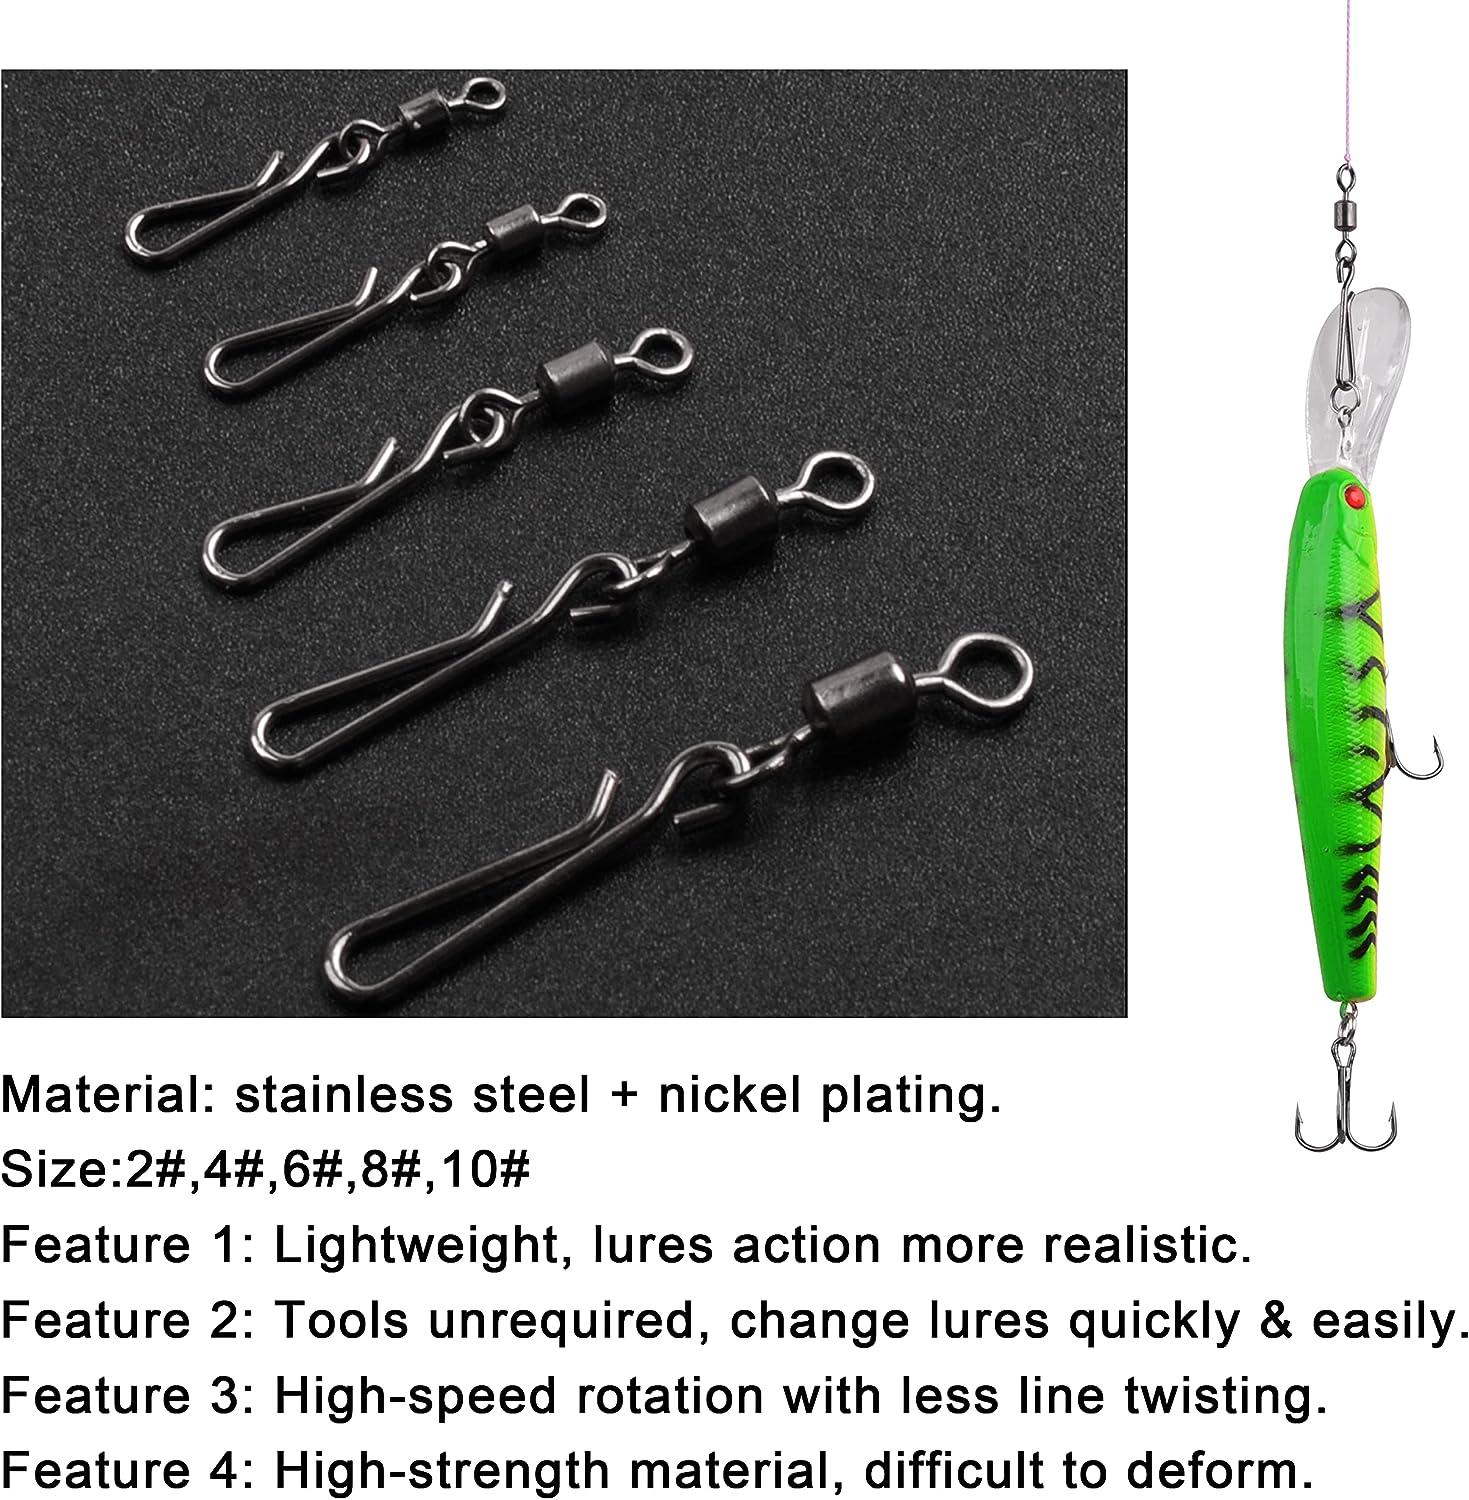 200Pcs #1 Stainless Steel Fishing Lock Snaps Fishing Clips Quick Change